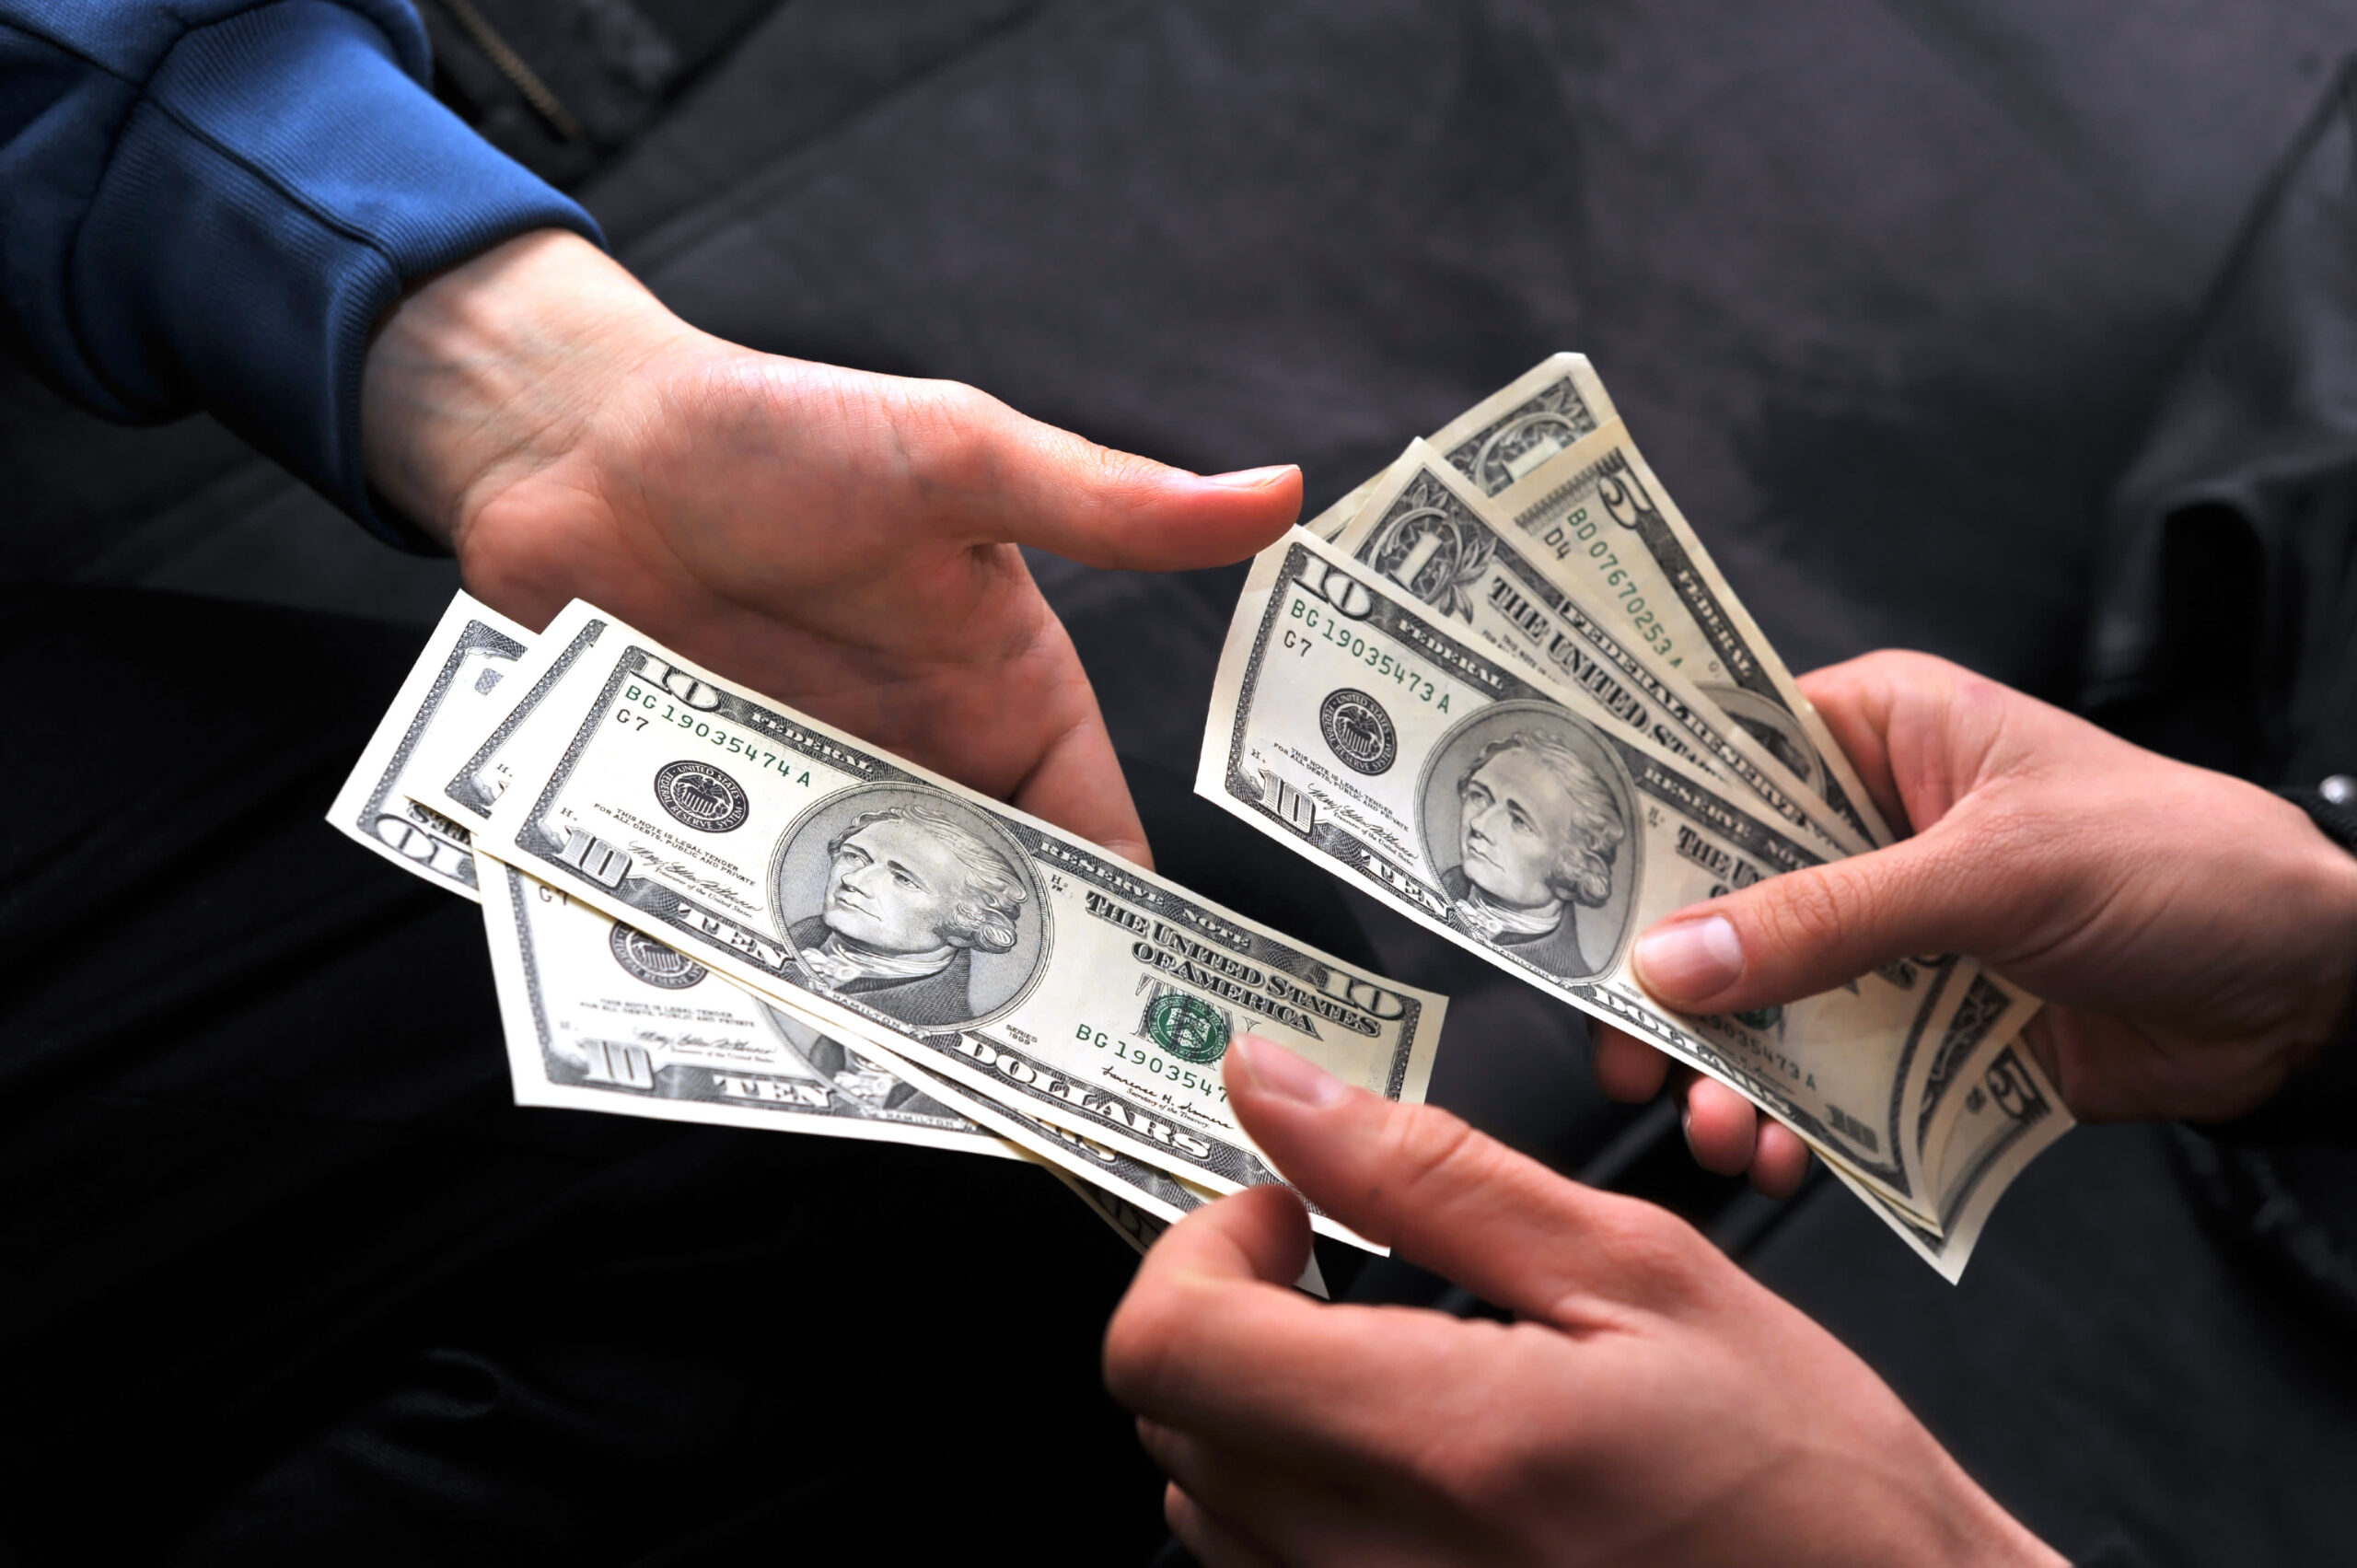 Top Rated Commercial Hard Money Lenders in the USA